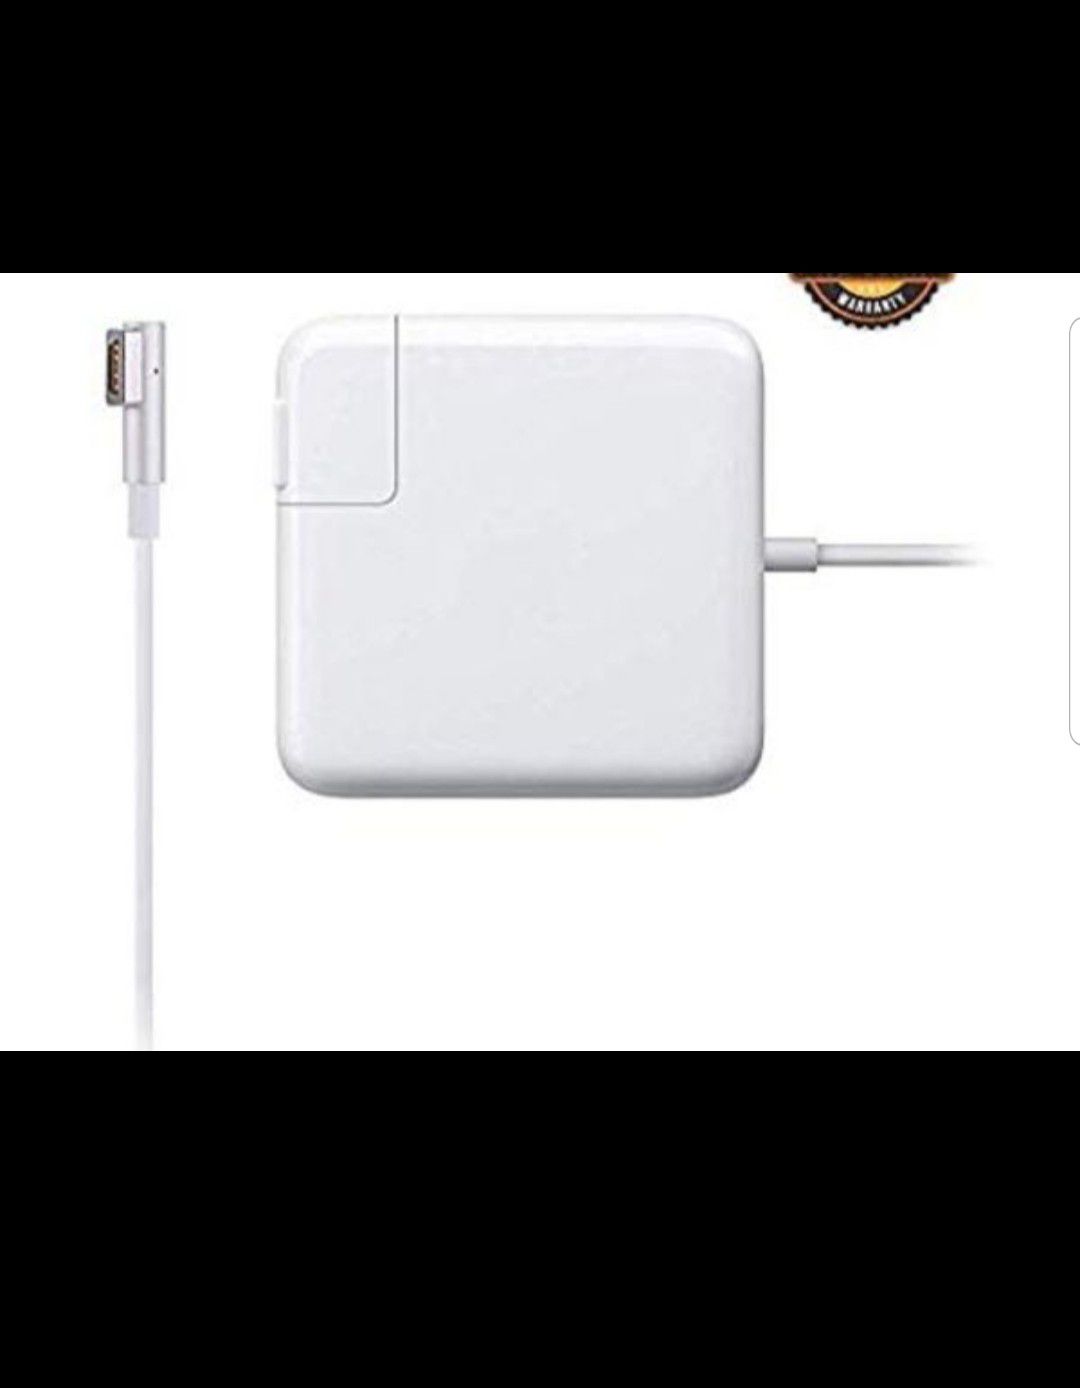 Mac Book Pro Charger, AC 85w Magsafe Power Adapter Replacement for MacBook